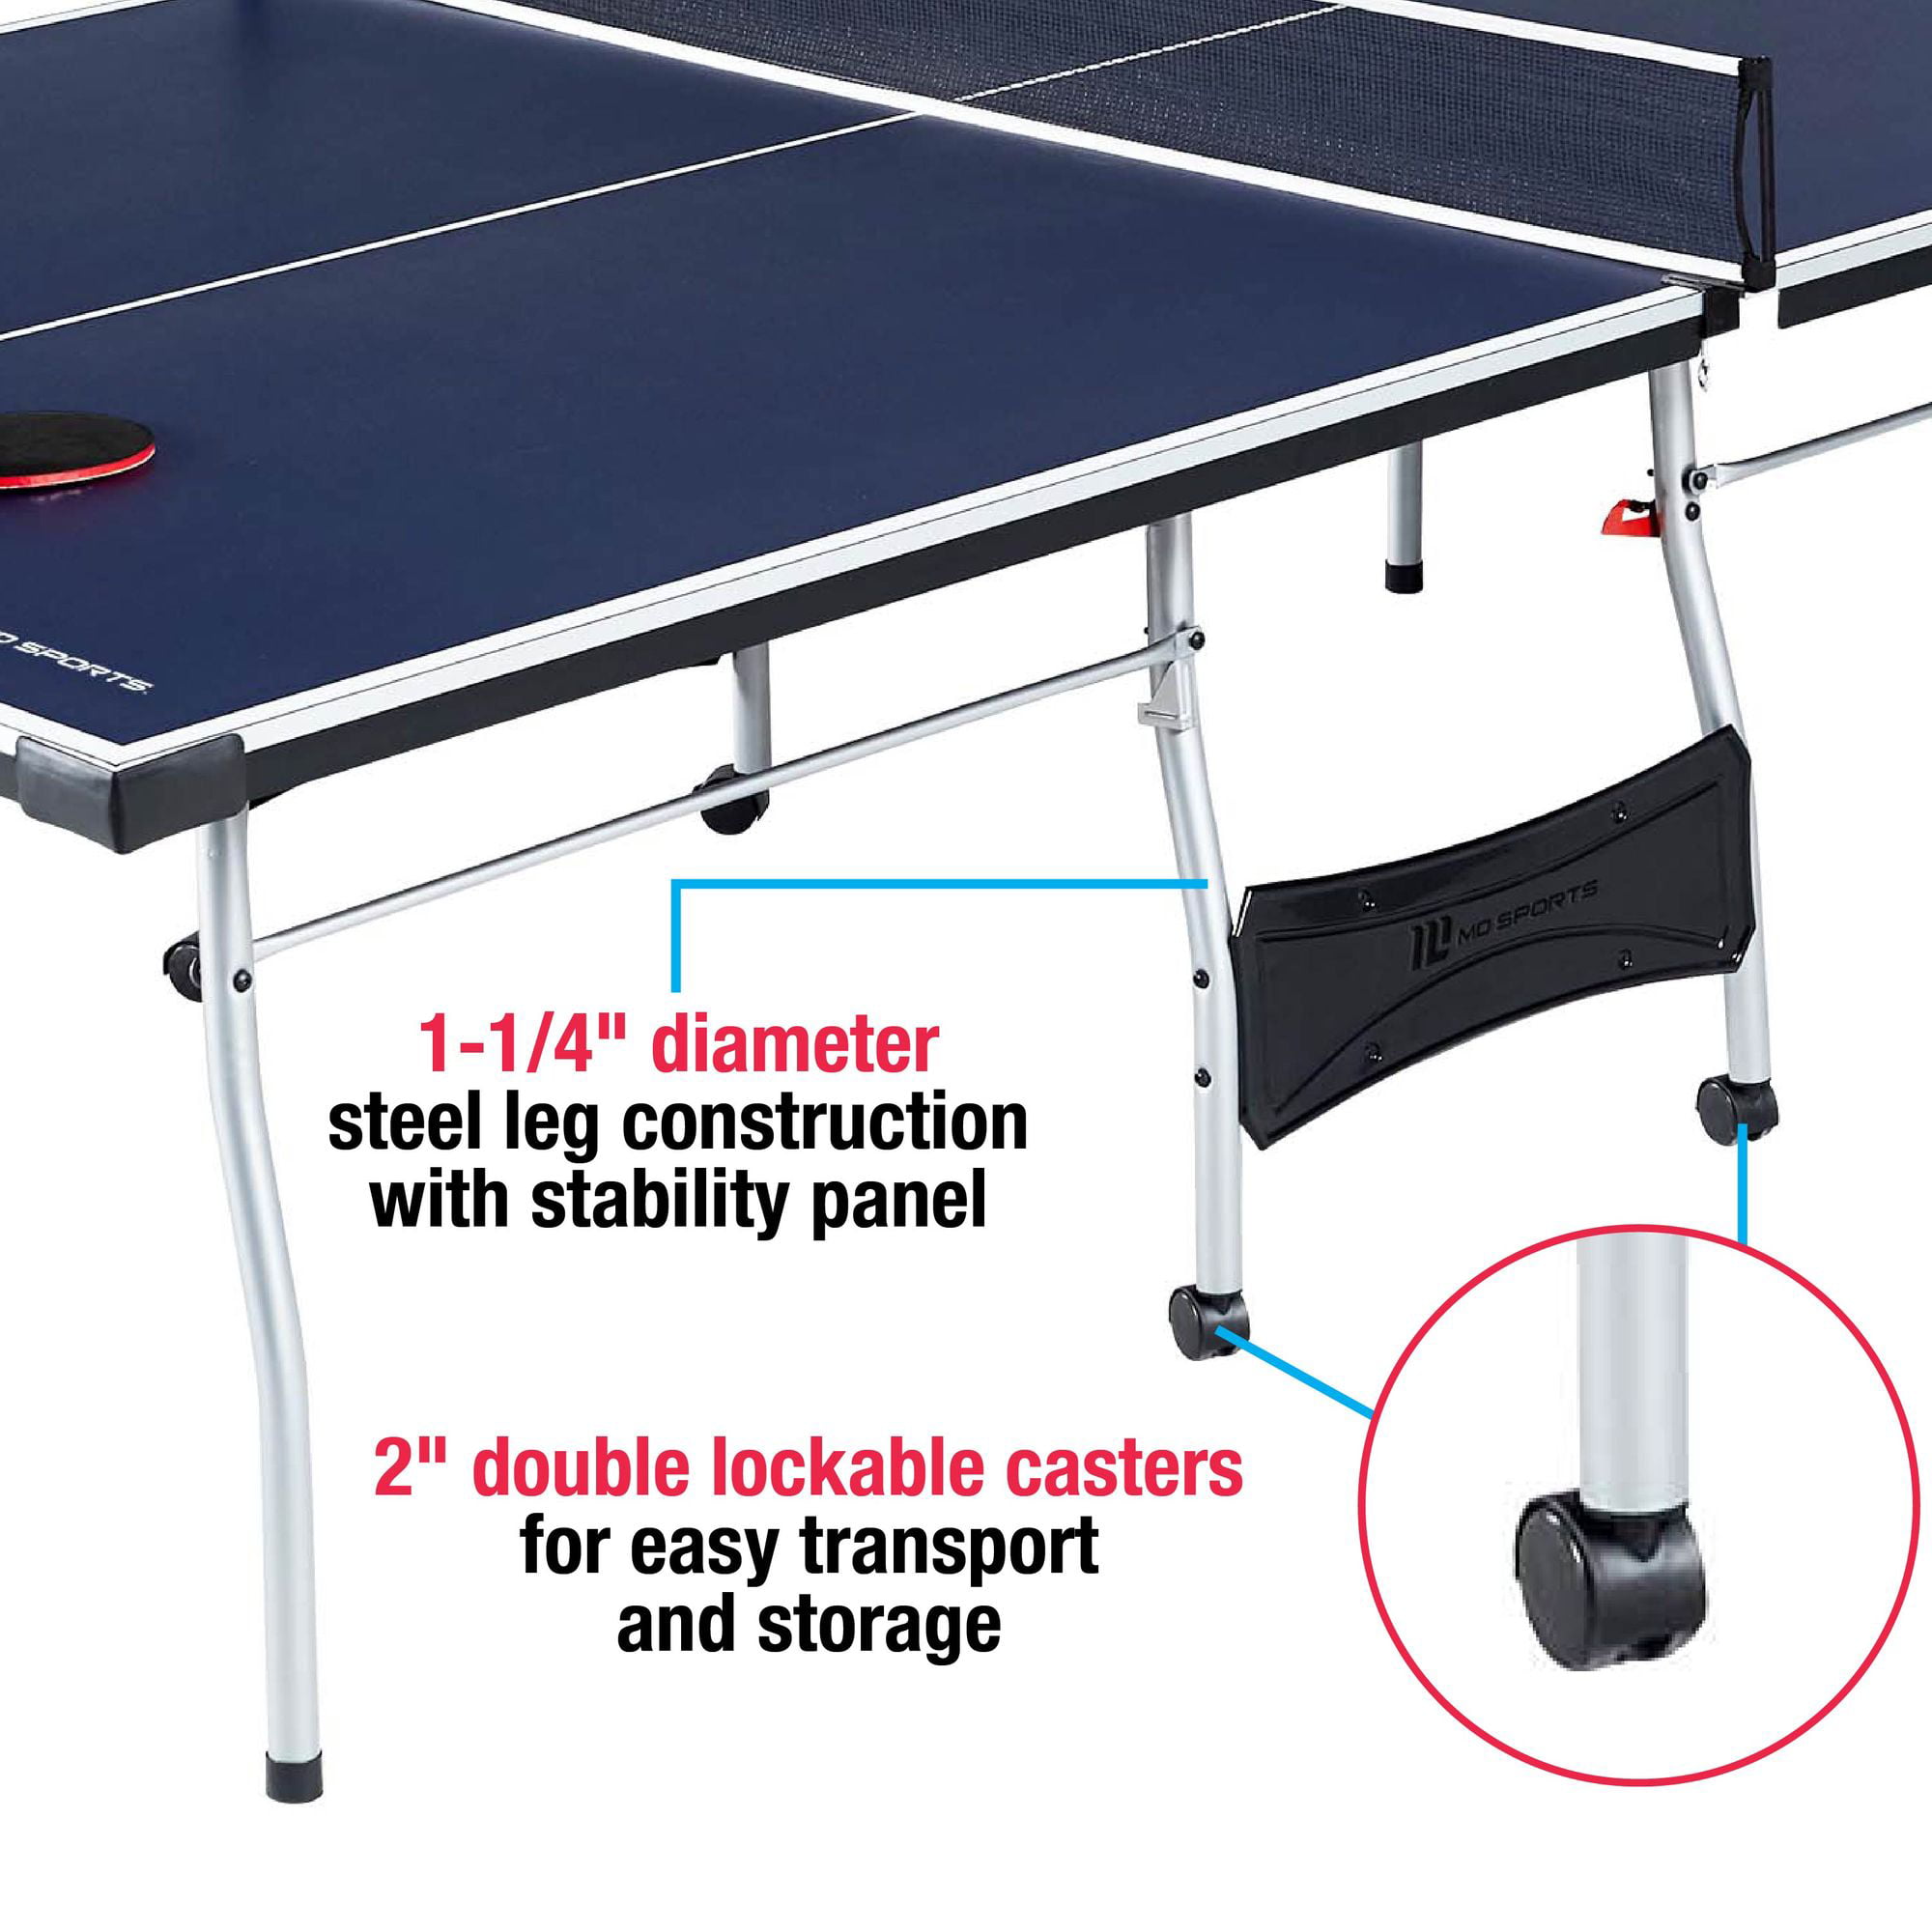 Md Sports Official Size Foldable Indoor Table Tennis Table